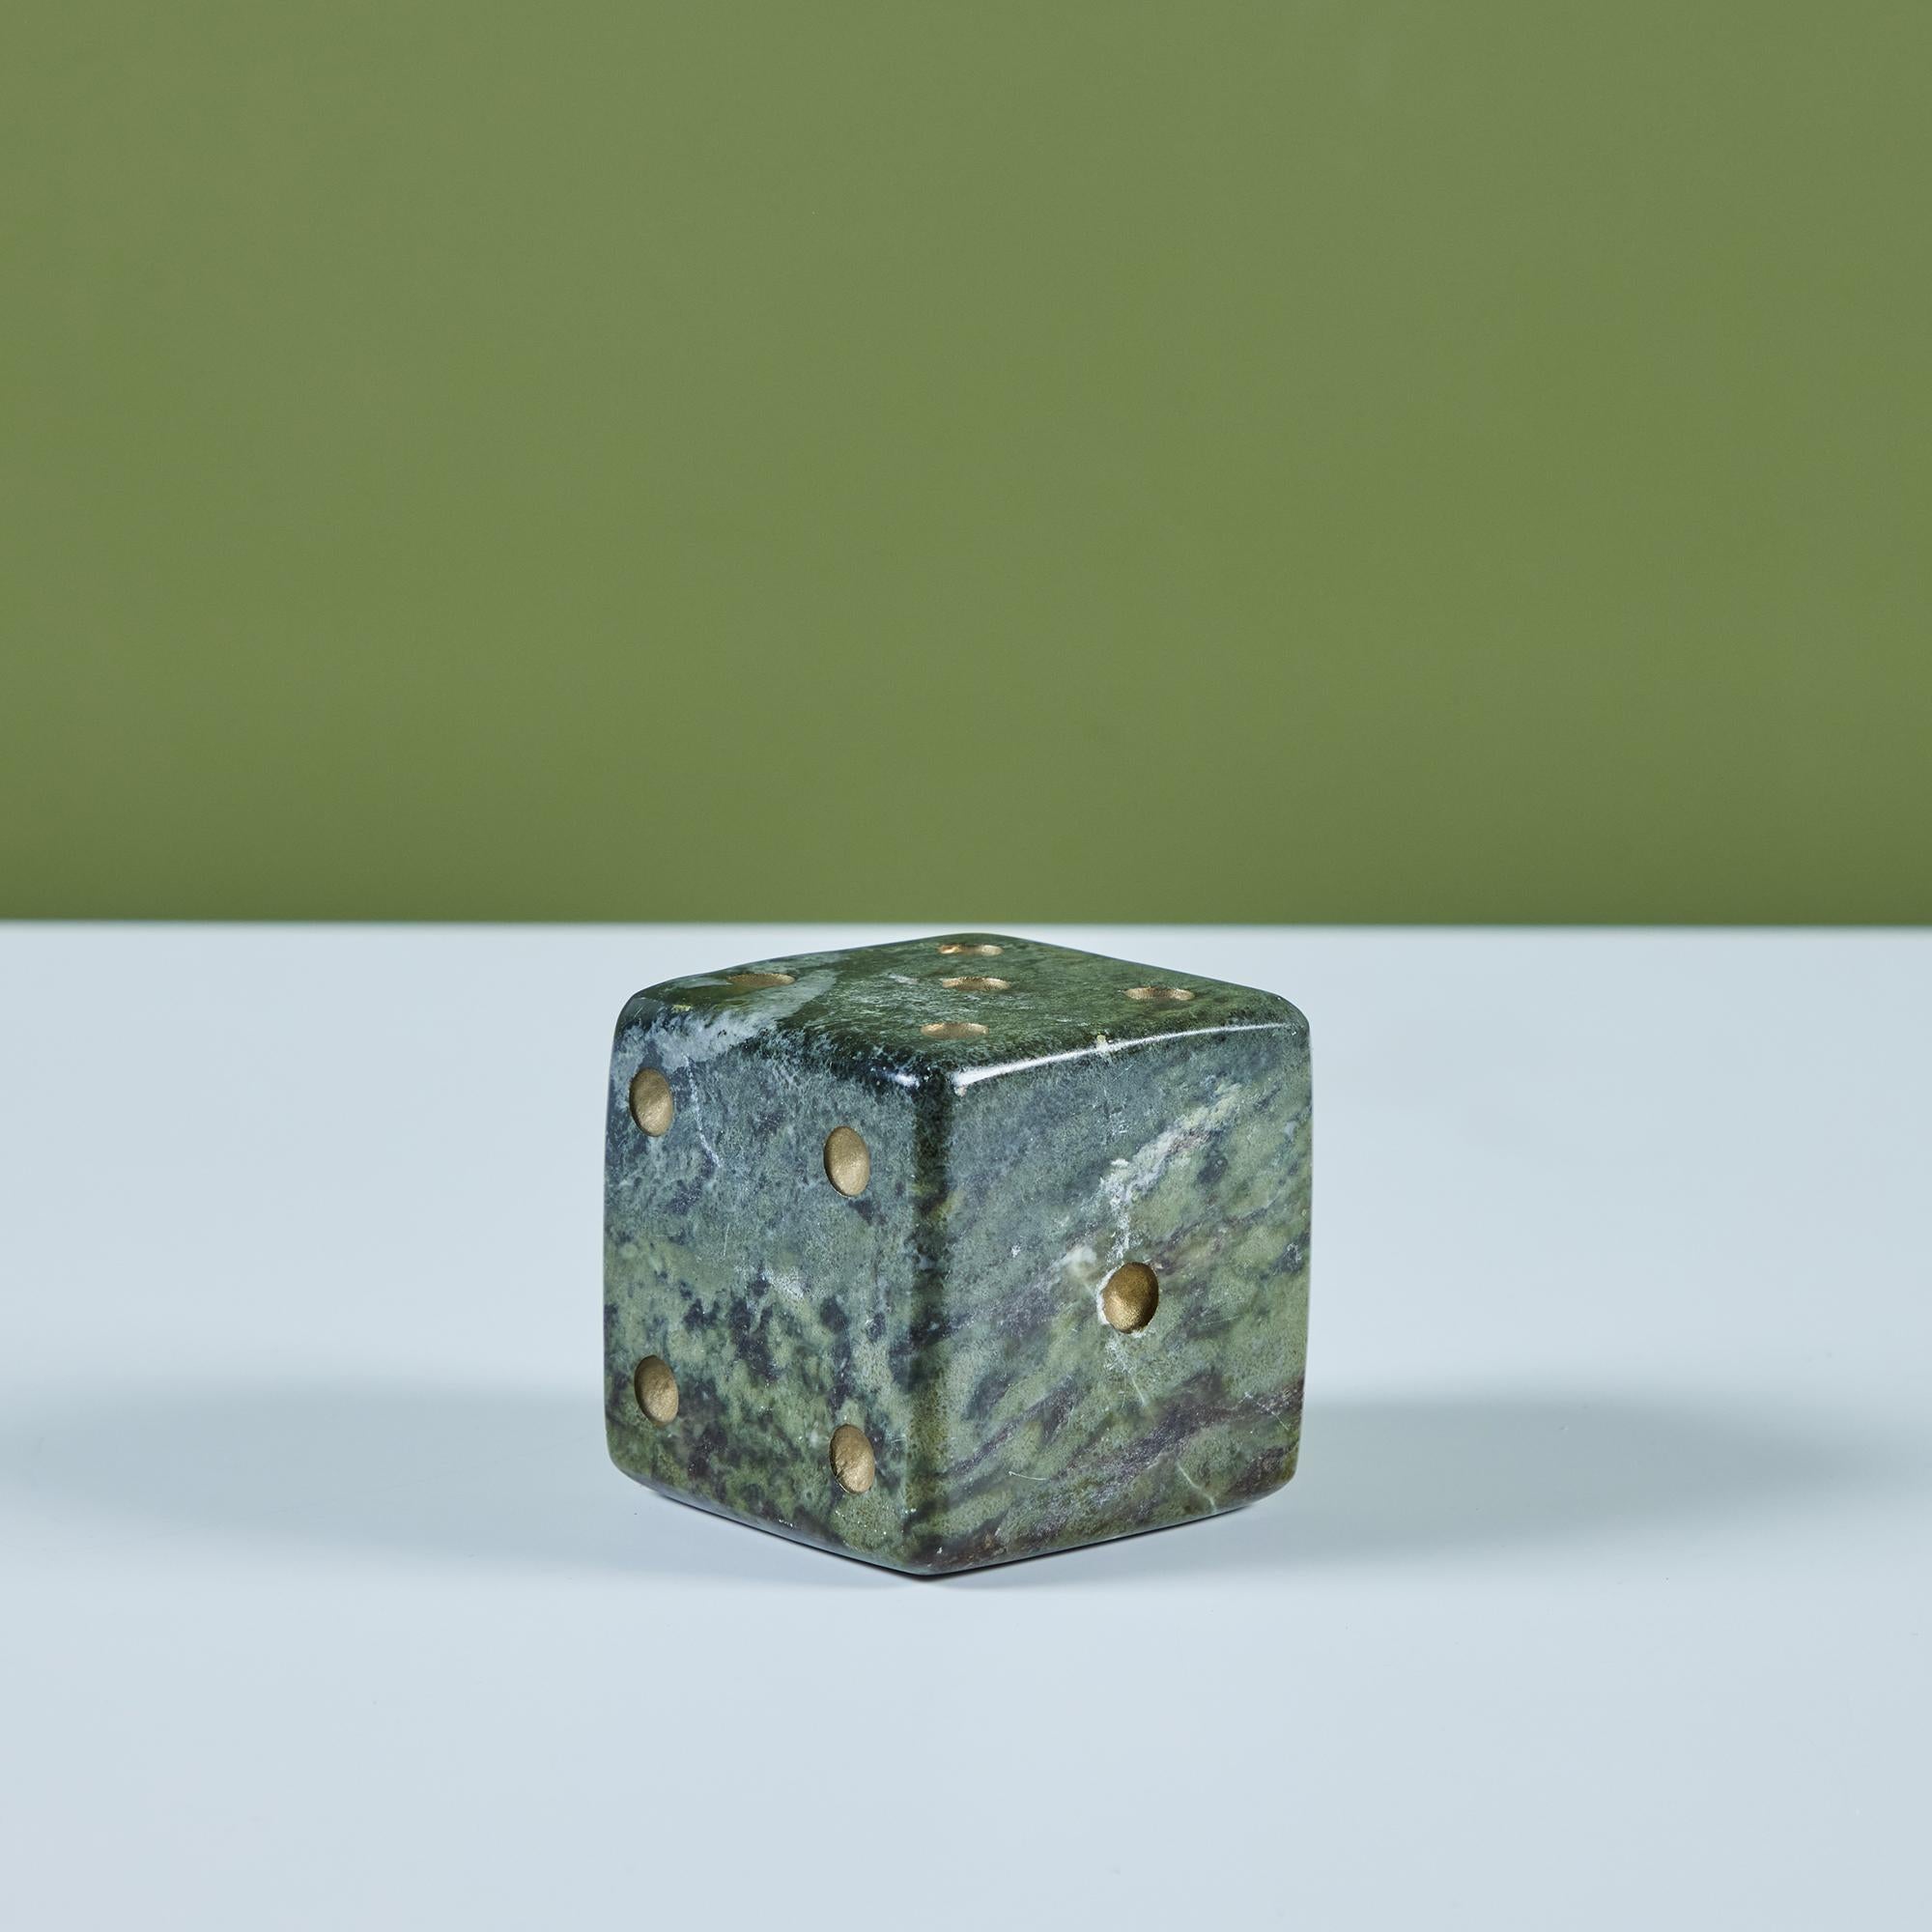 Green marble die. The die features a polished exterior stone with cream veining throughout.

Dimensions 
3